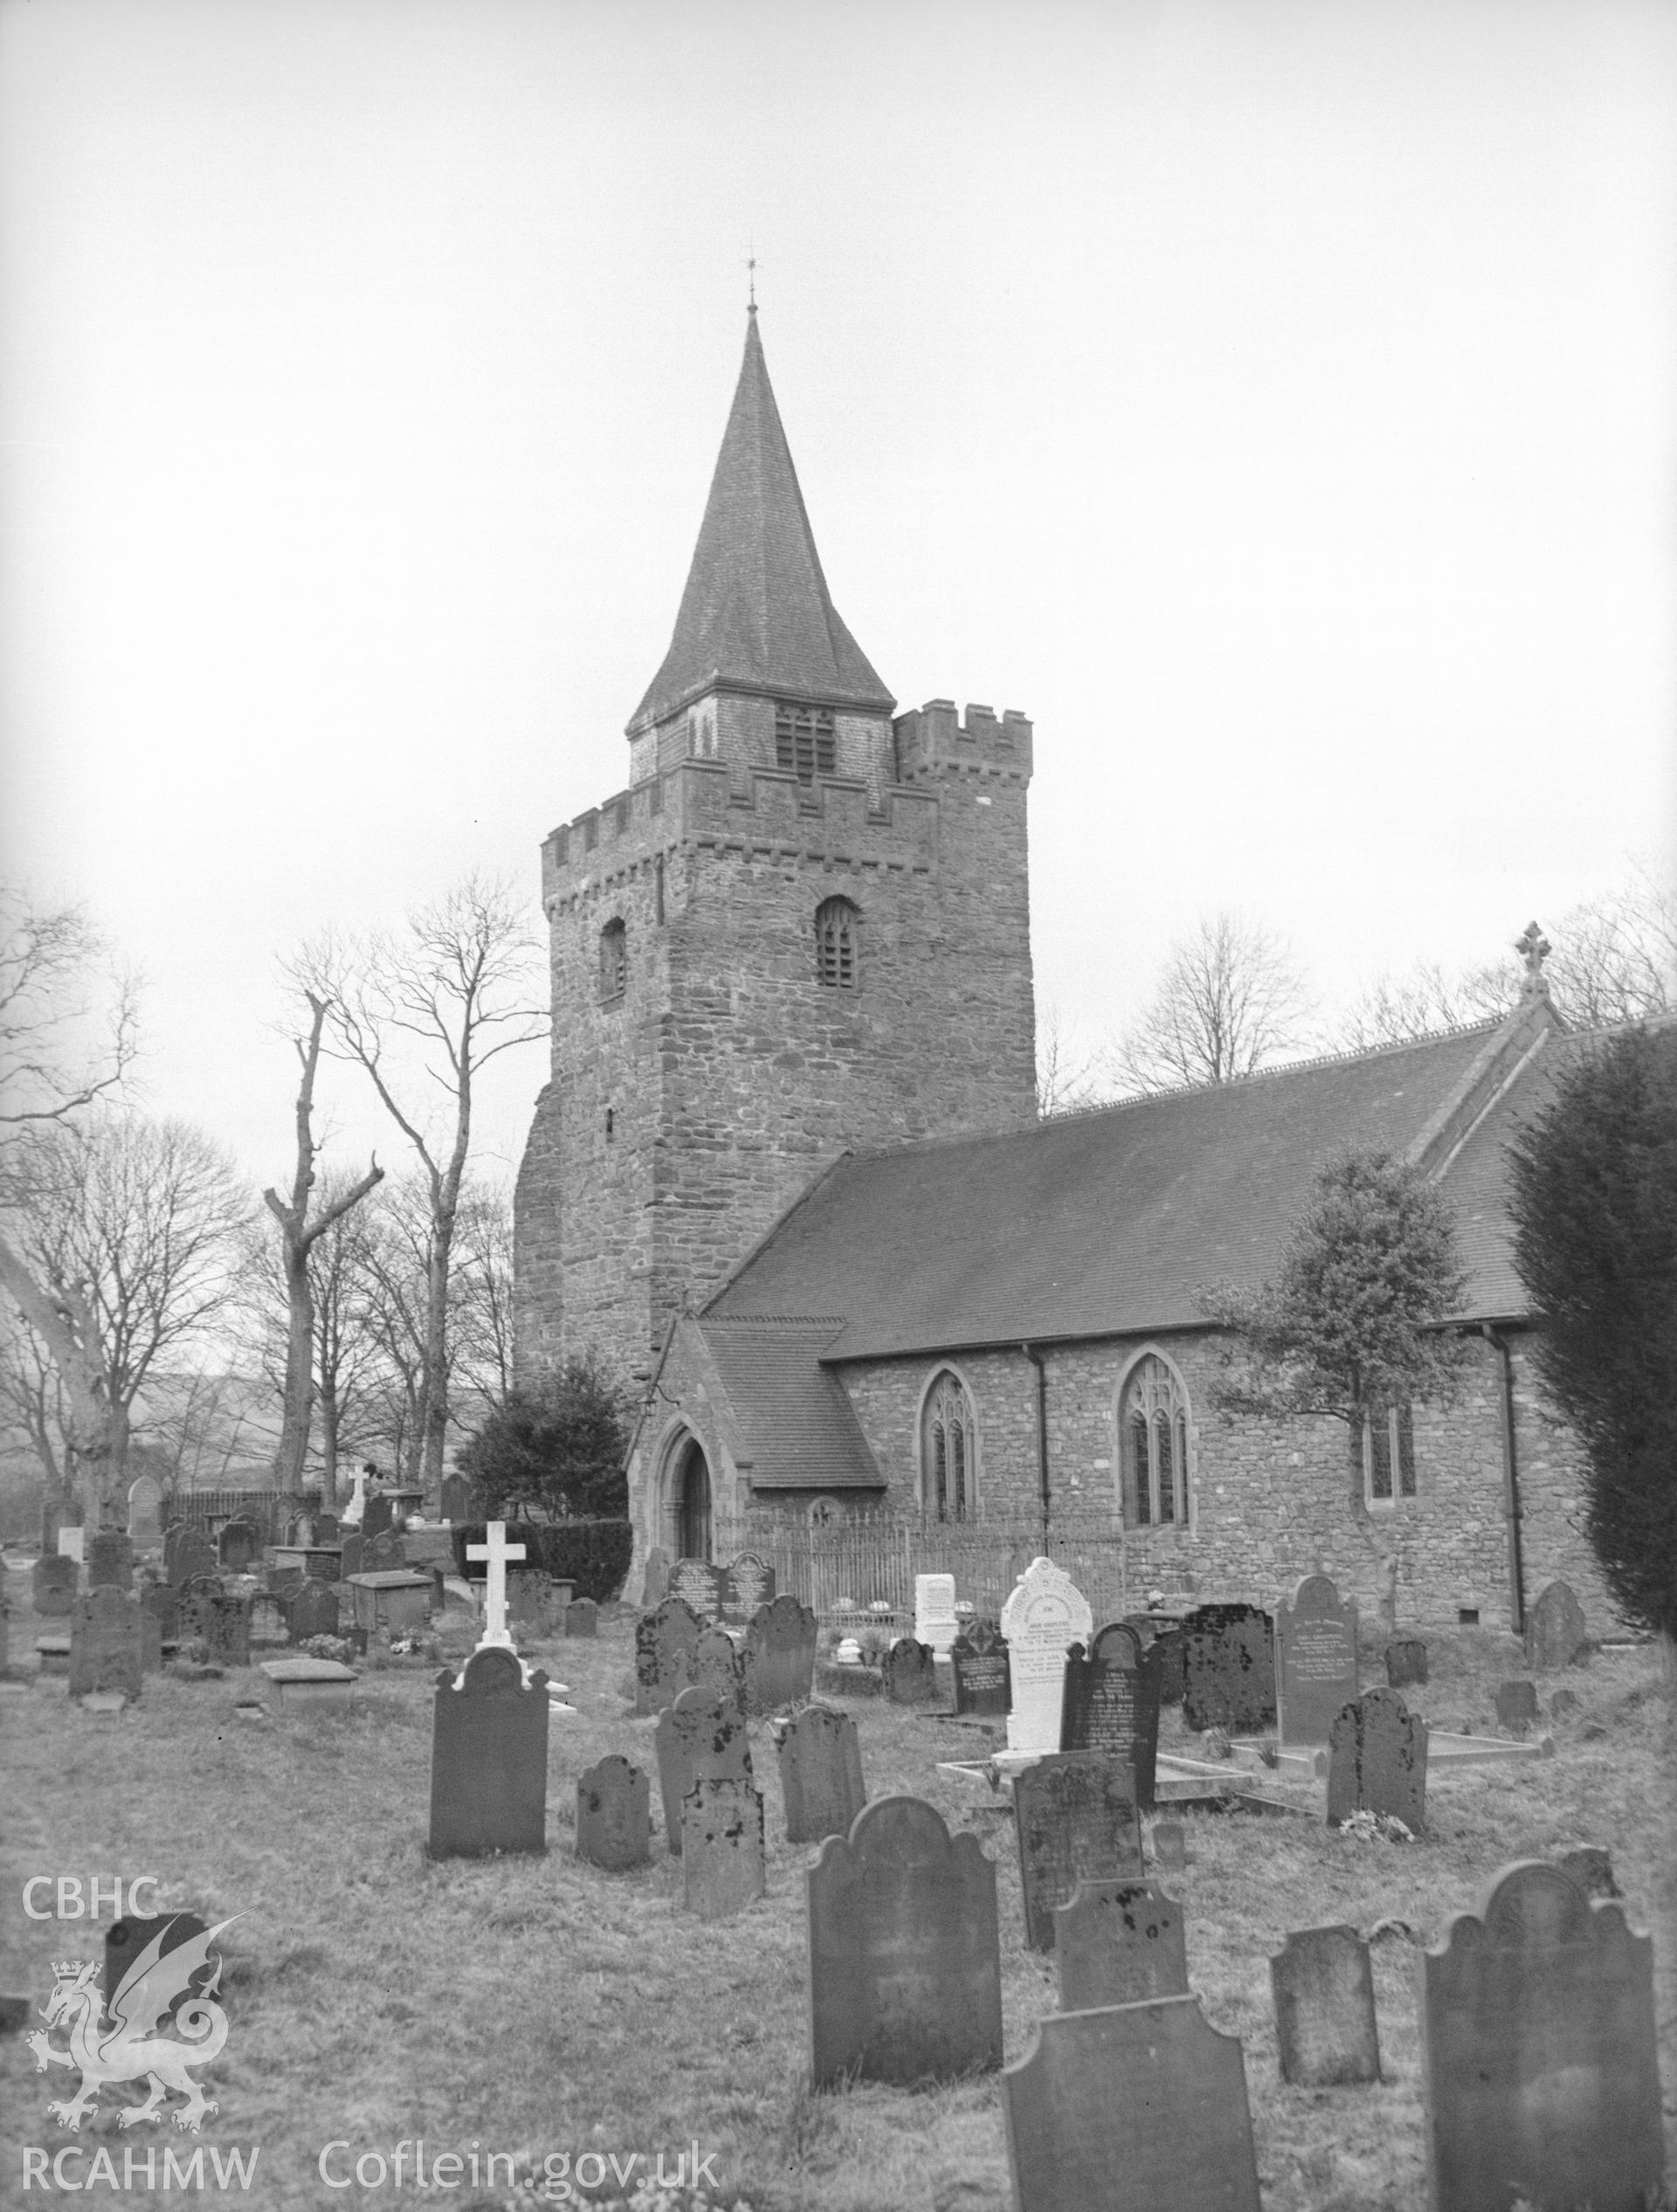 Digital copy of a nitrate negative showing exterior view of St Curig's Church and churchyard, Llangurig. From the National Building Record Postcard Collection.